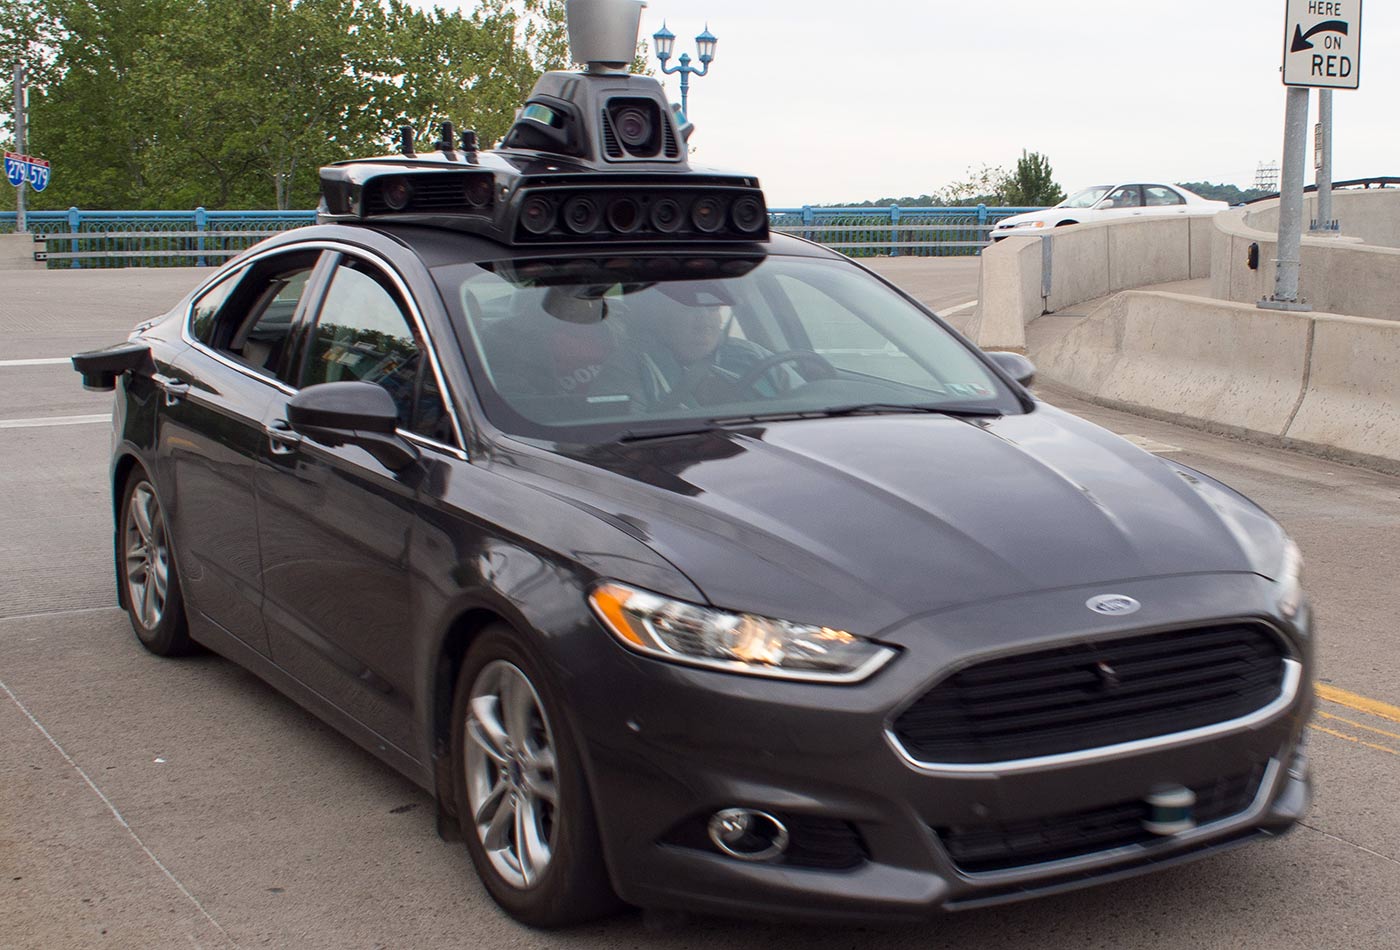 Close up of Uber's Self Driving Car in Pittsburgh.